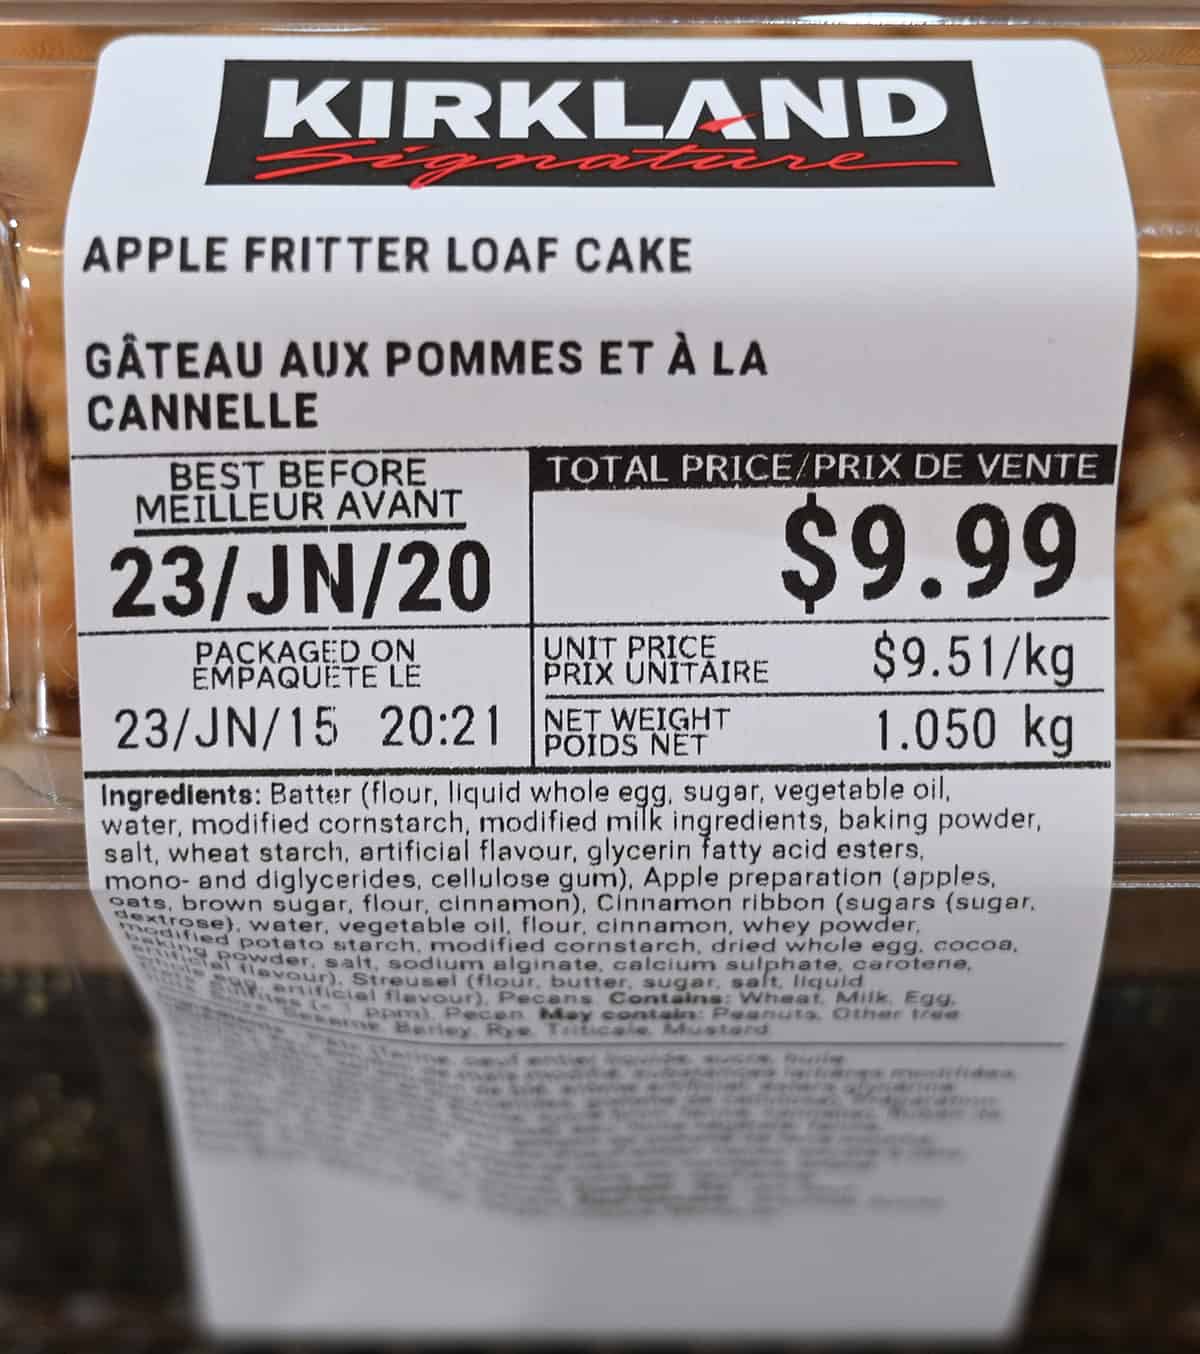 Image of the front label on the Costco apple fritter loaf showing the price, best before date and ingredients.